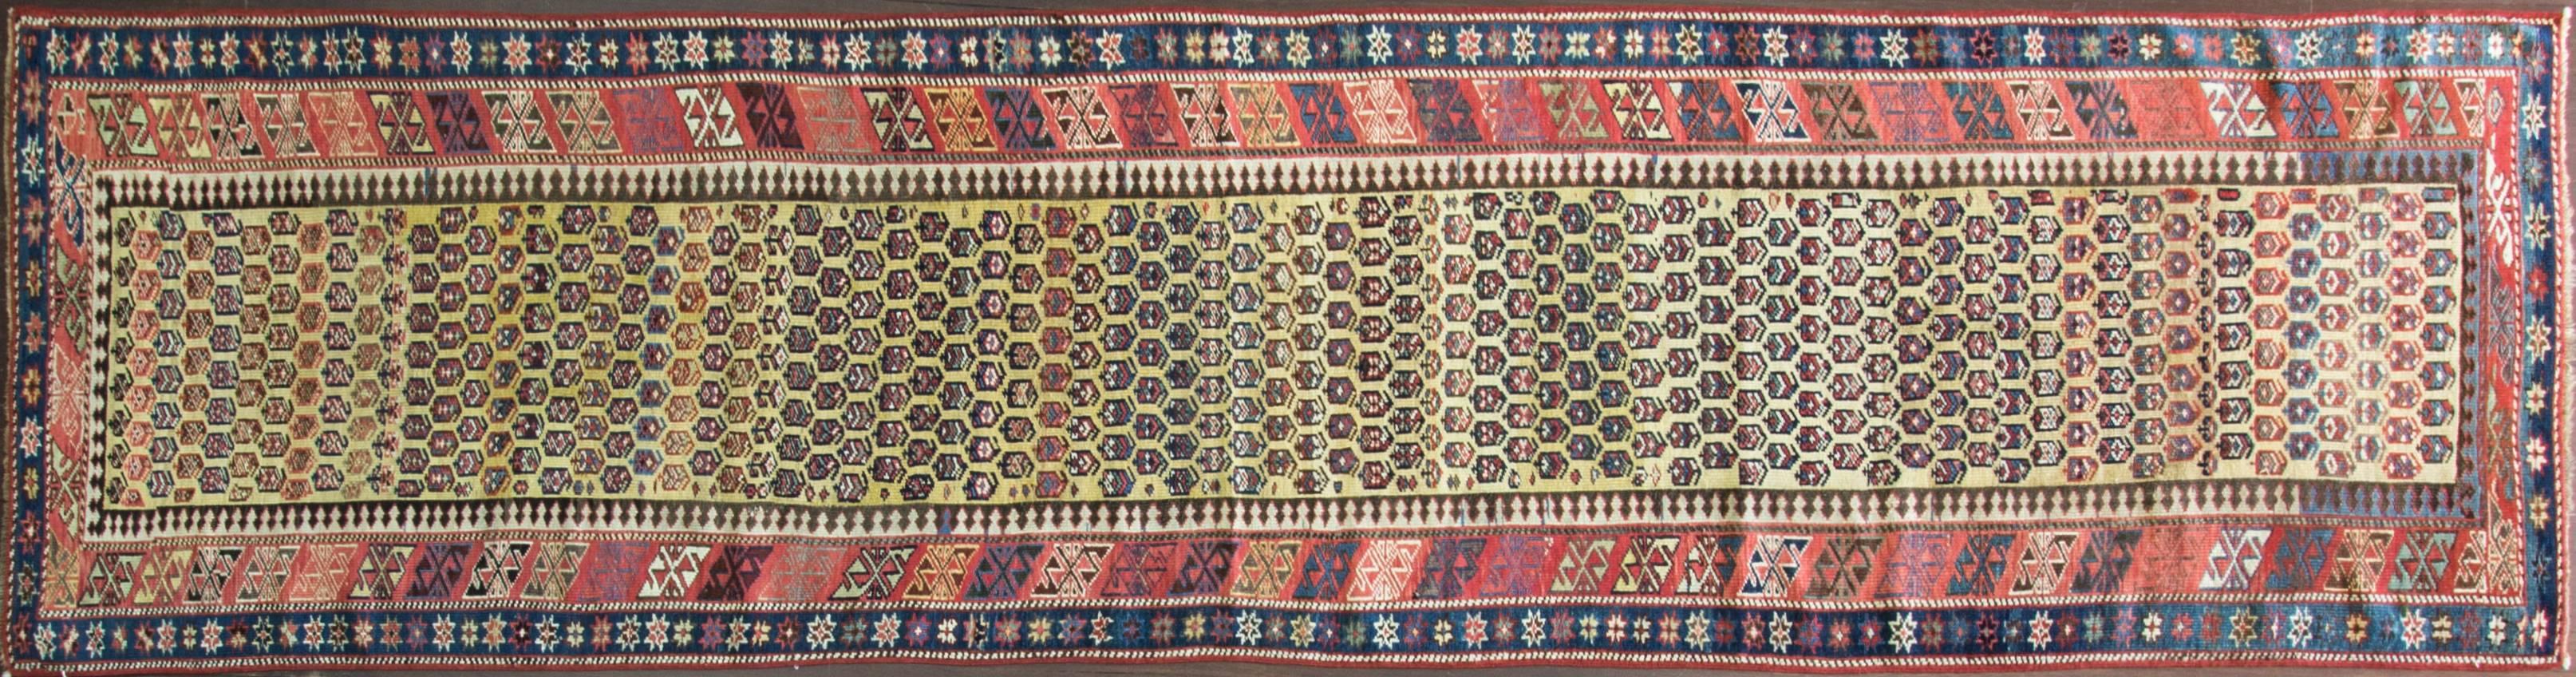 Shirvan rugs from district of Shirvan produced many highly decorative antique rugs. The depth of colors, the complexity of the composition and the phenomenal patterns featured in antique Shirvan rugs set them apart from those produced in other